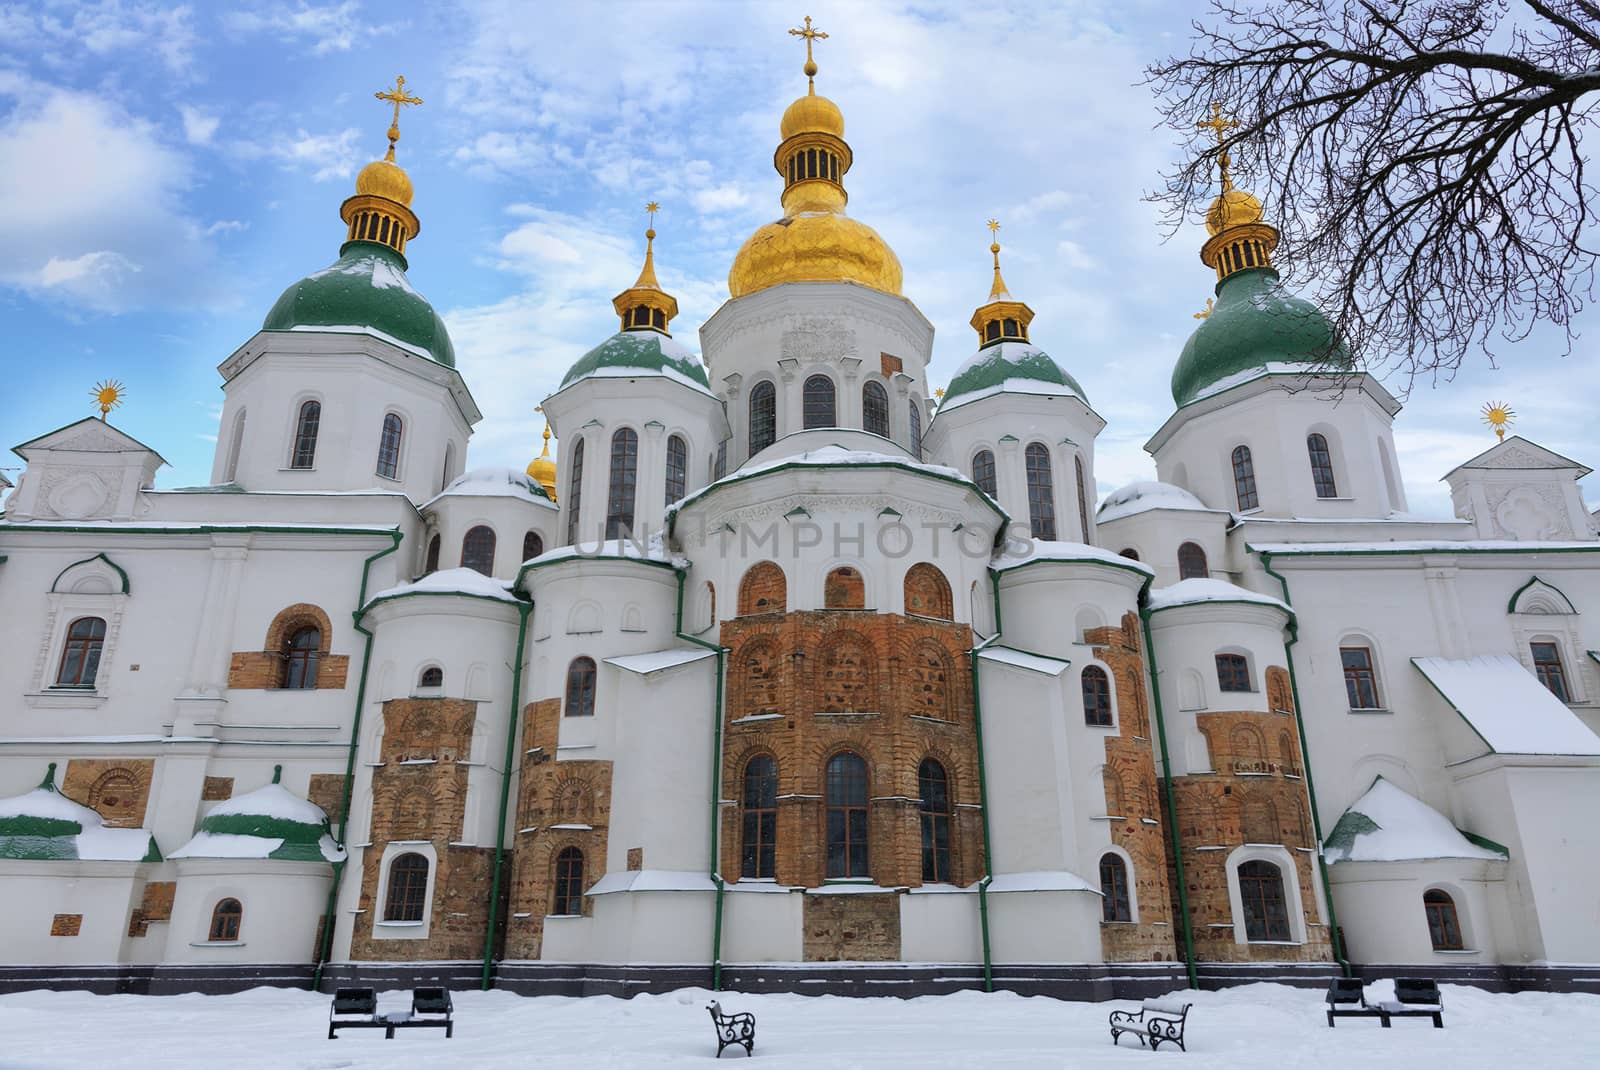 The building of the famous St. Sophia Cathedral in Kyiv in the winter 01/07/2019 against the blue cloudy sky